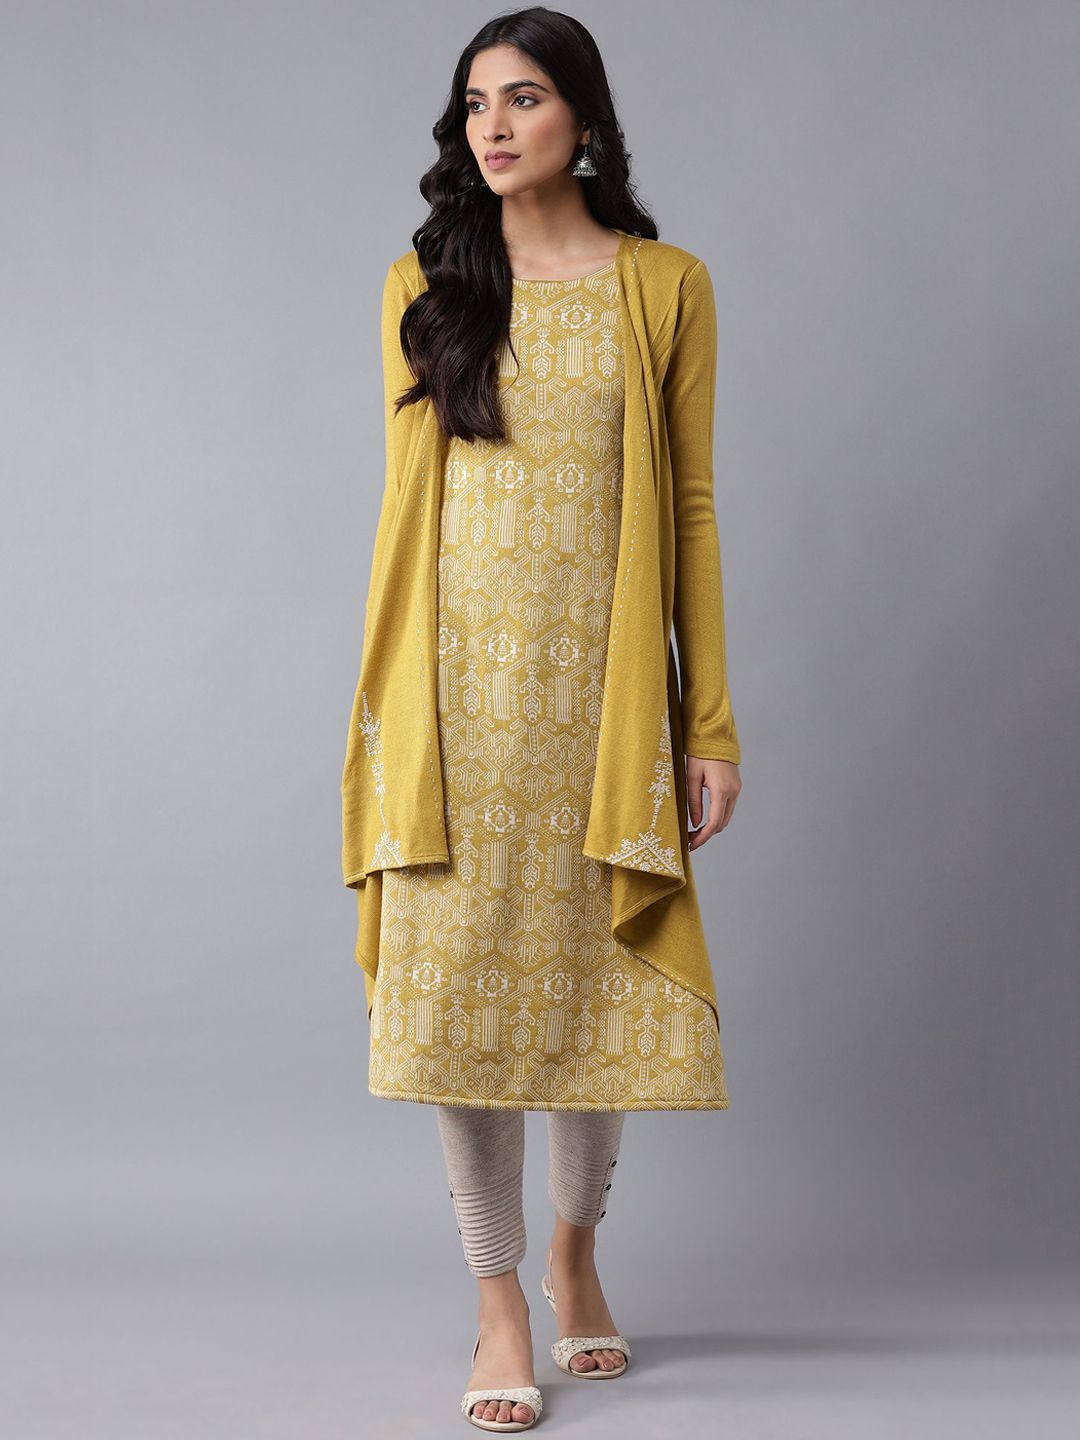 W Women Yellow Floral Acrylic Longline Open Front Jacket Price in India